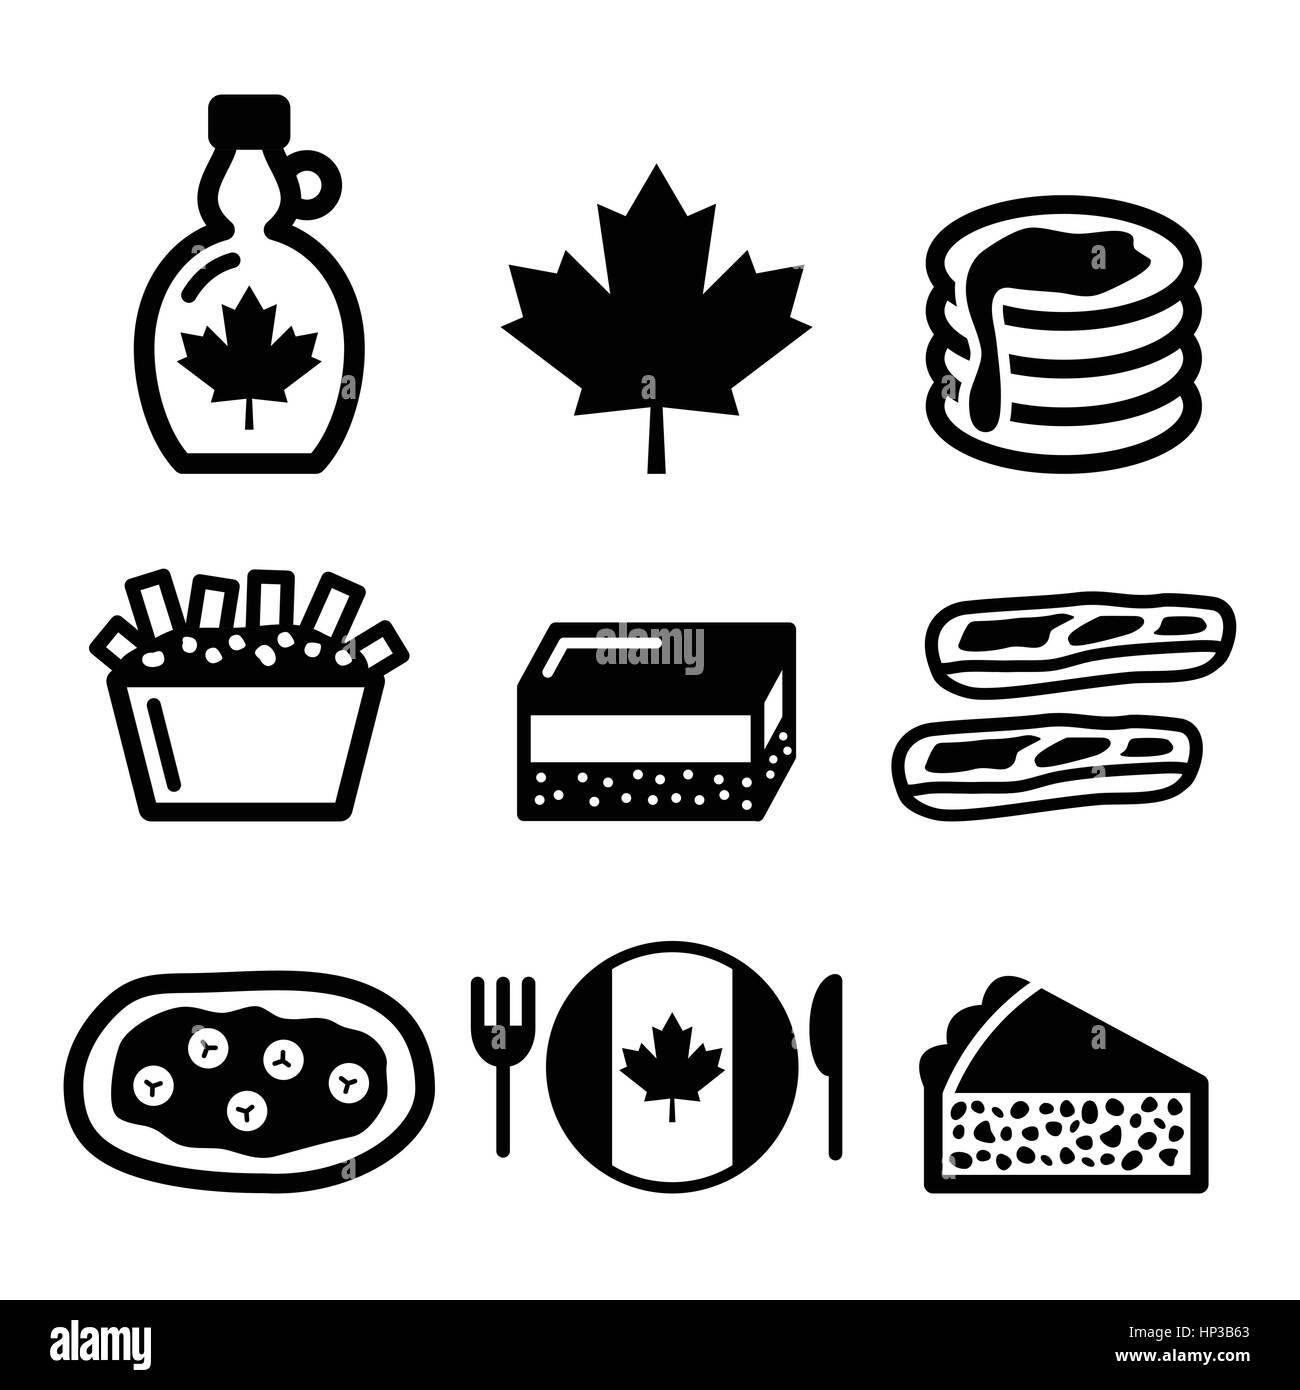 Canadian food icons - maple syrup, poutine, nanaimo bar, beaver tale, tourtière. Vector icons set - traditional meals and dishes from Cana Stock Vector